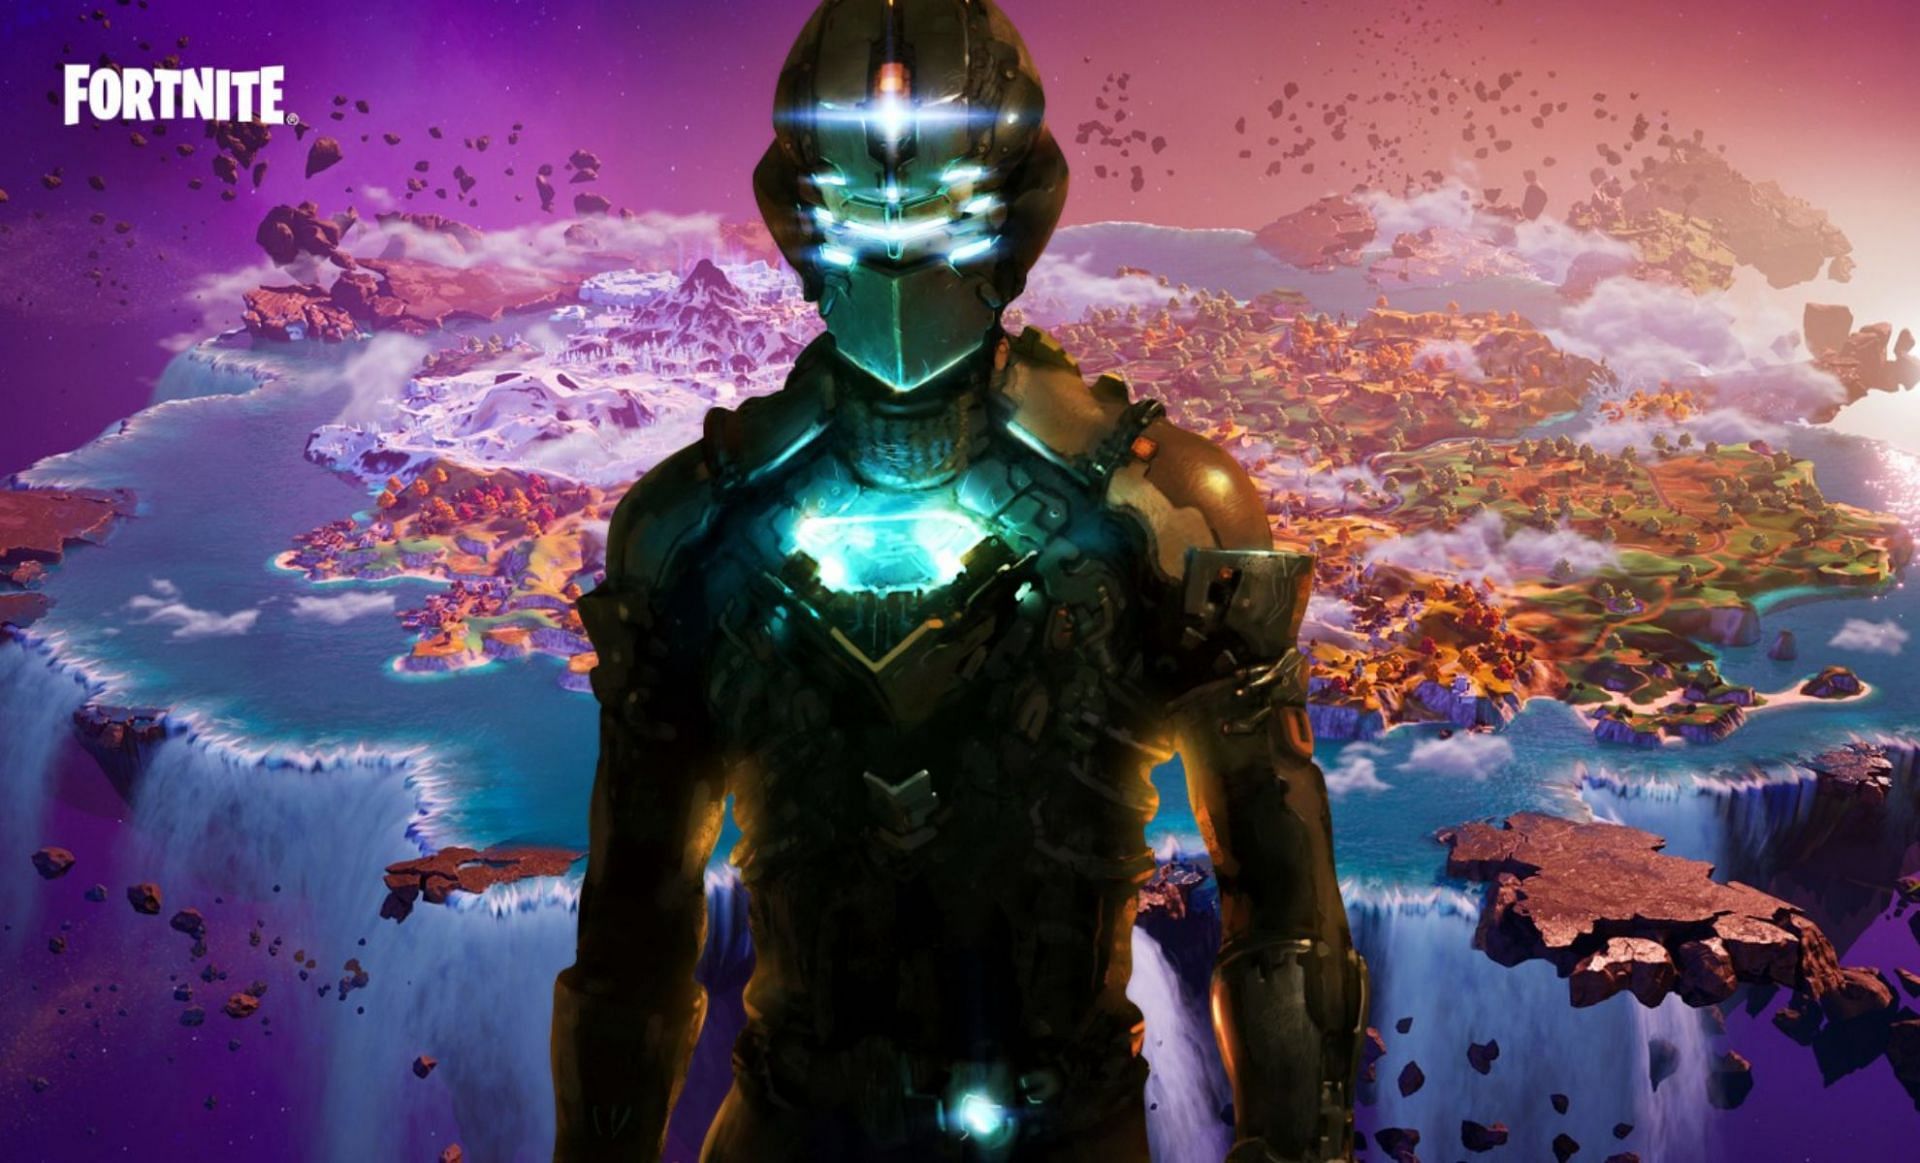 Is Dead Space coming to Fortnite? (Image via Epic Games)